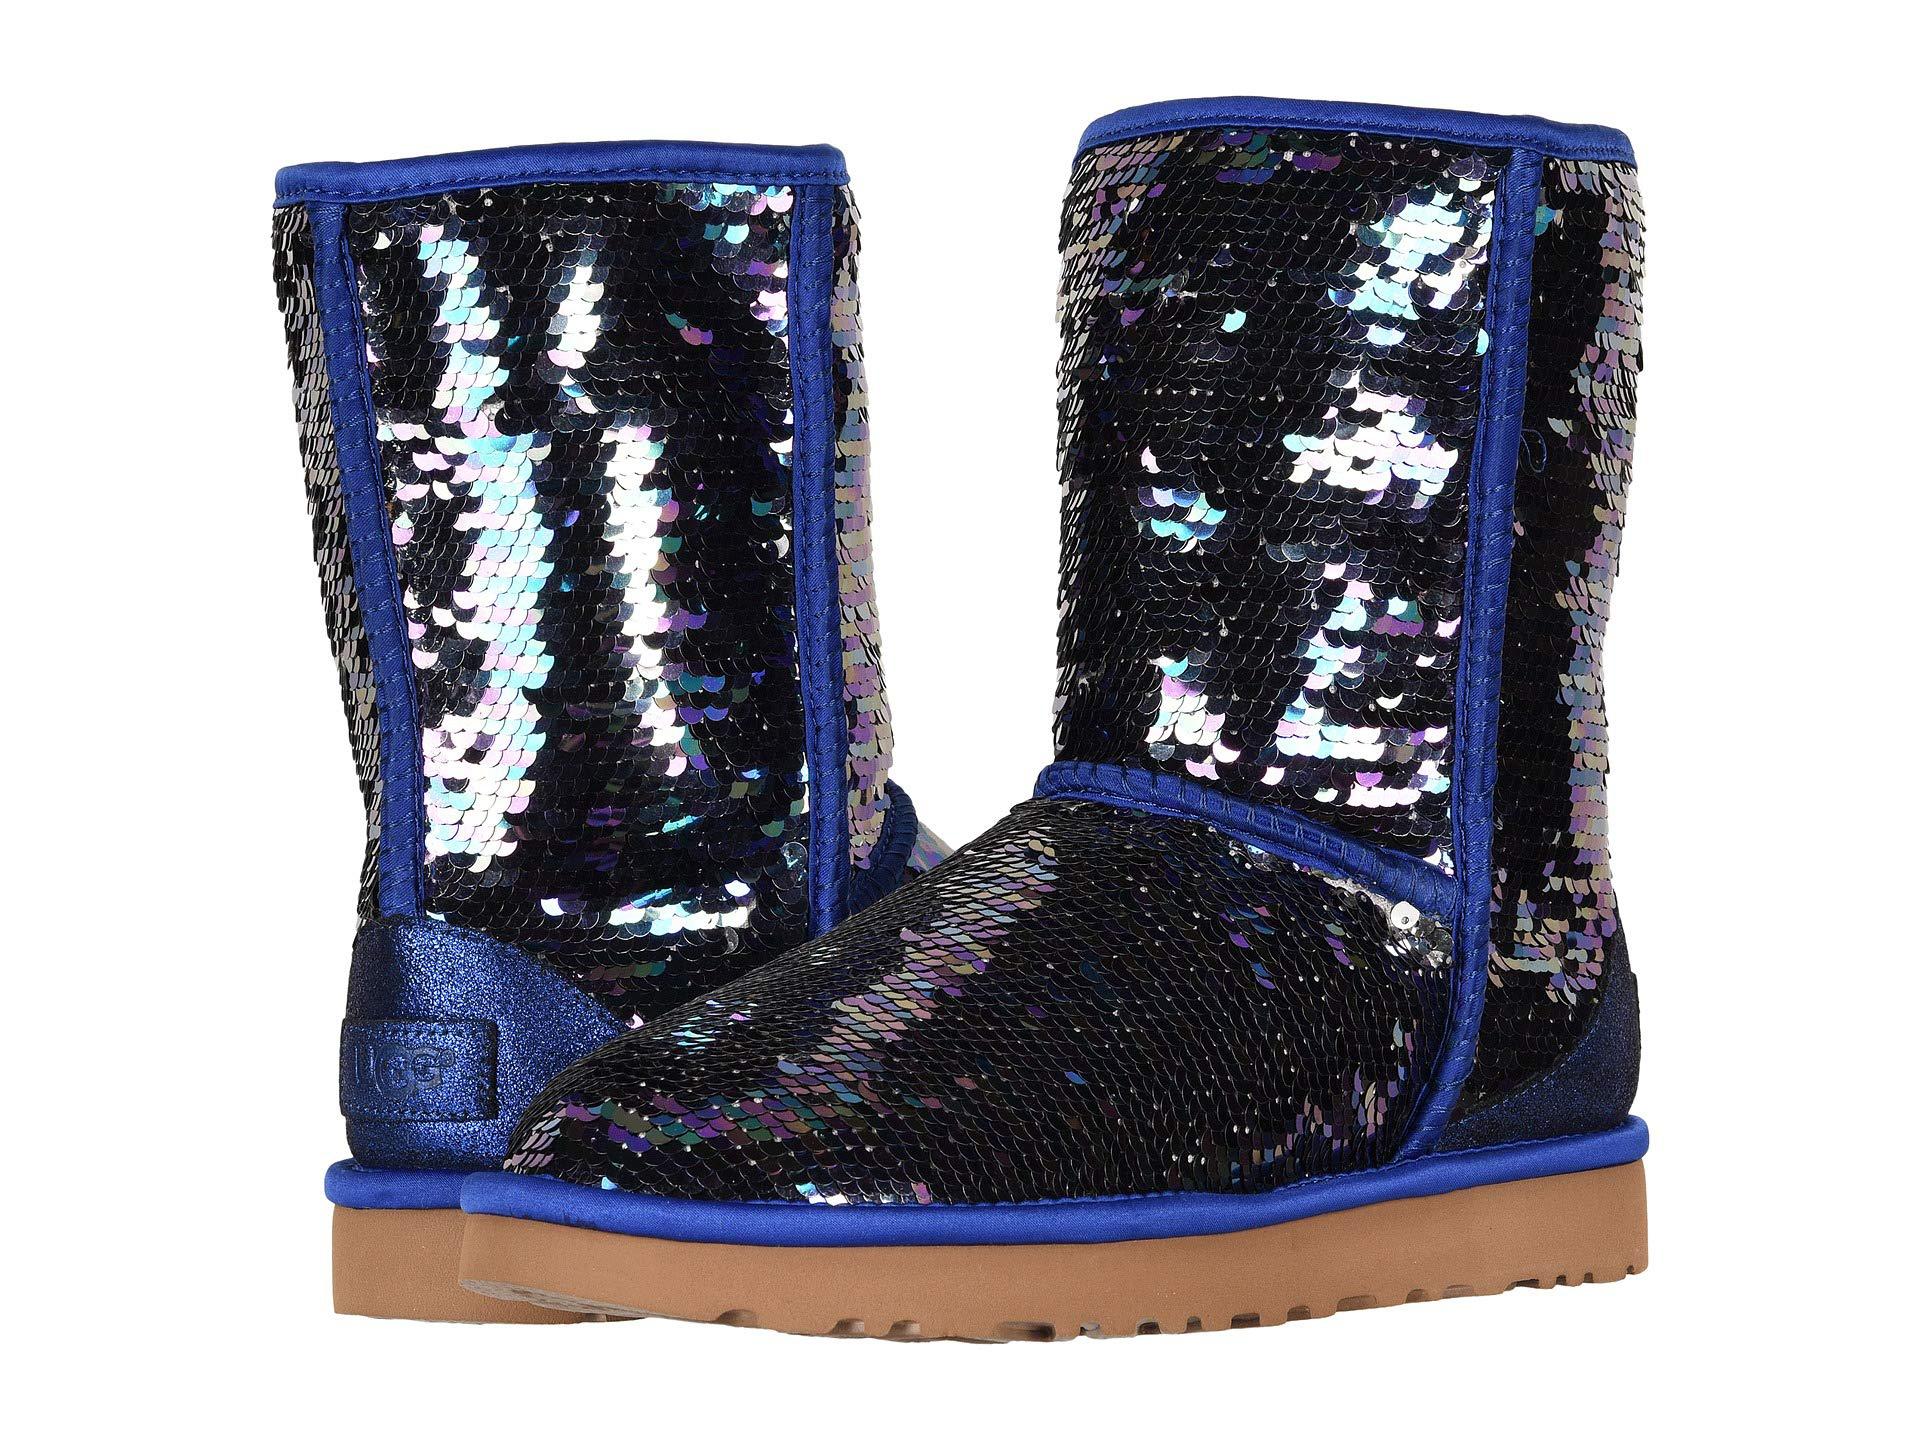 Lyst - Ugg Classic Short Sequin (gold Combo) Women's Pull-on Boots in Blue